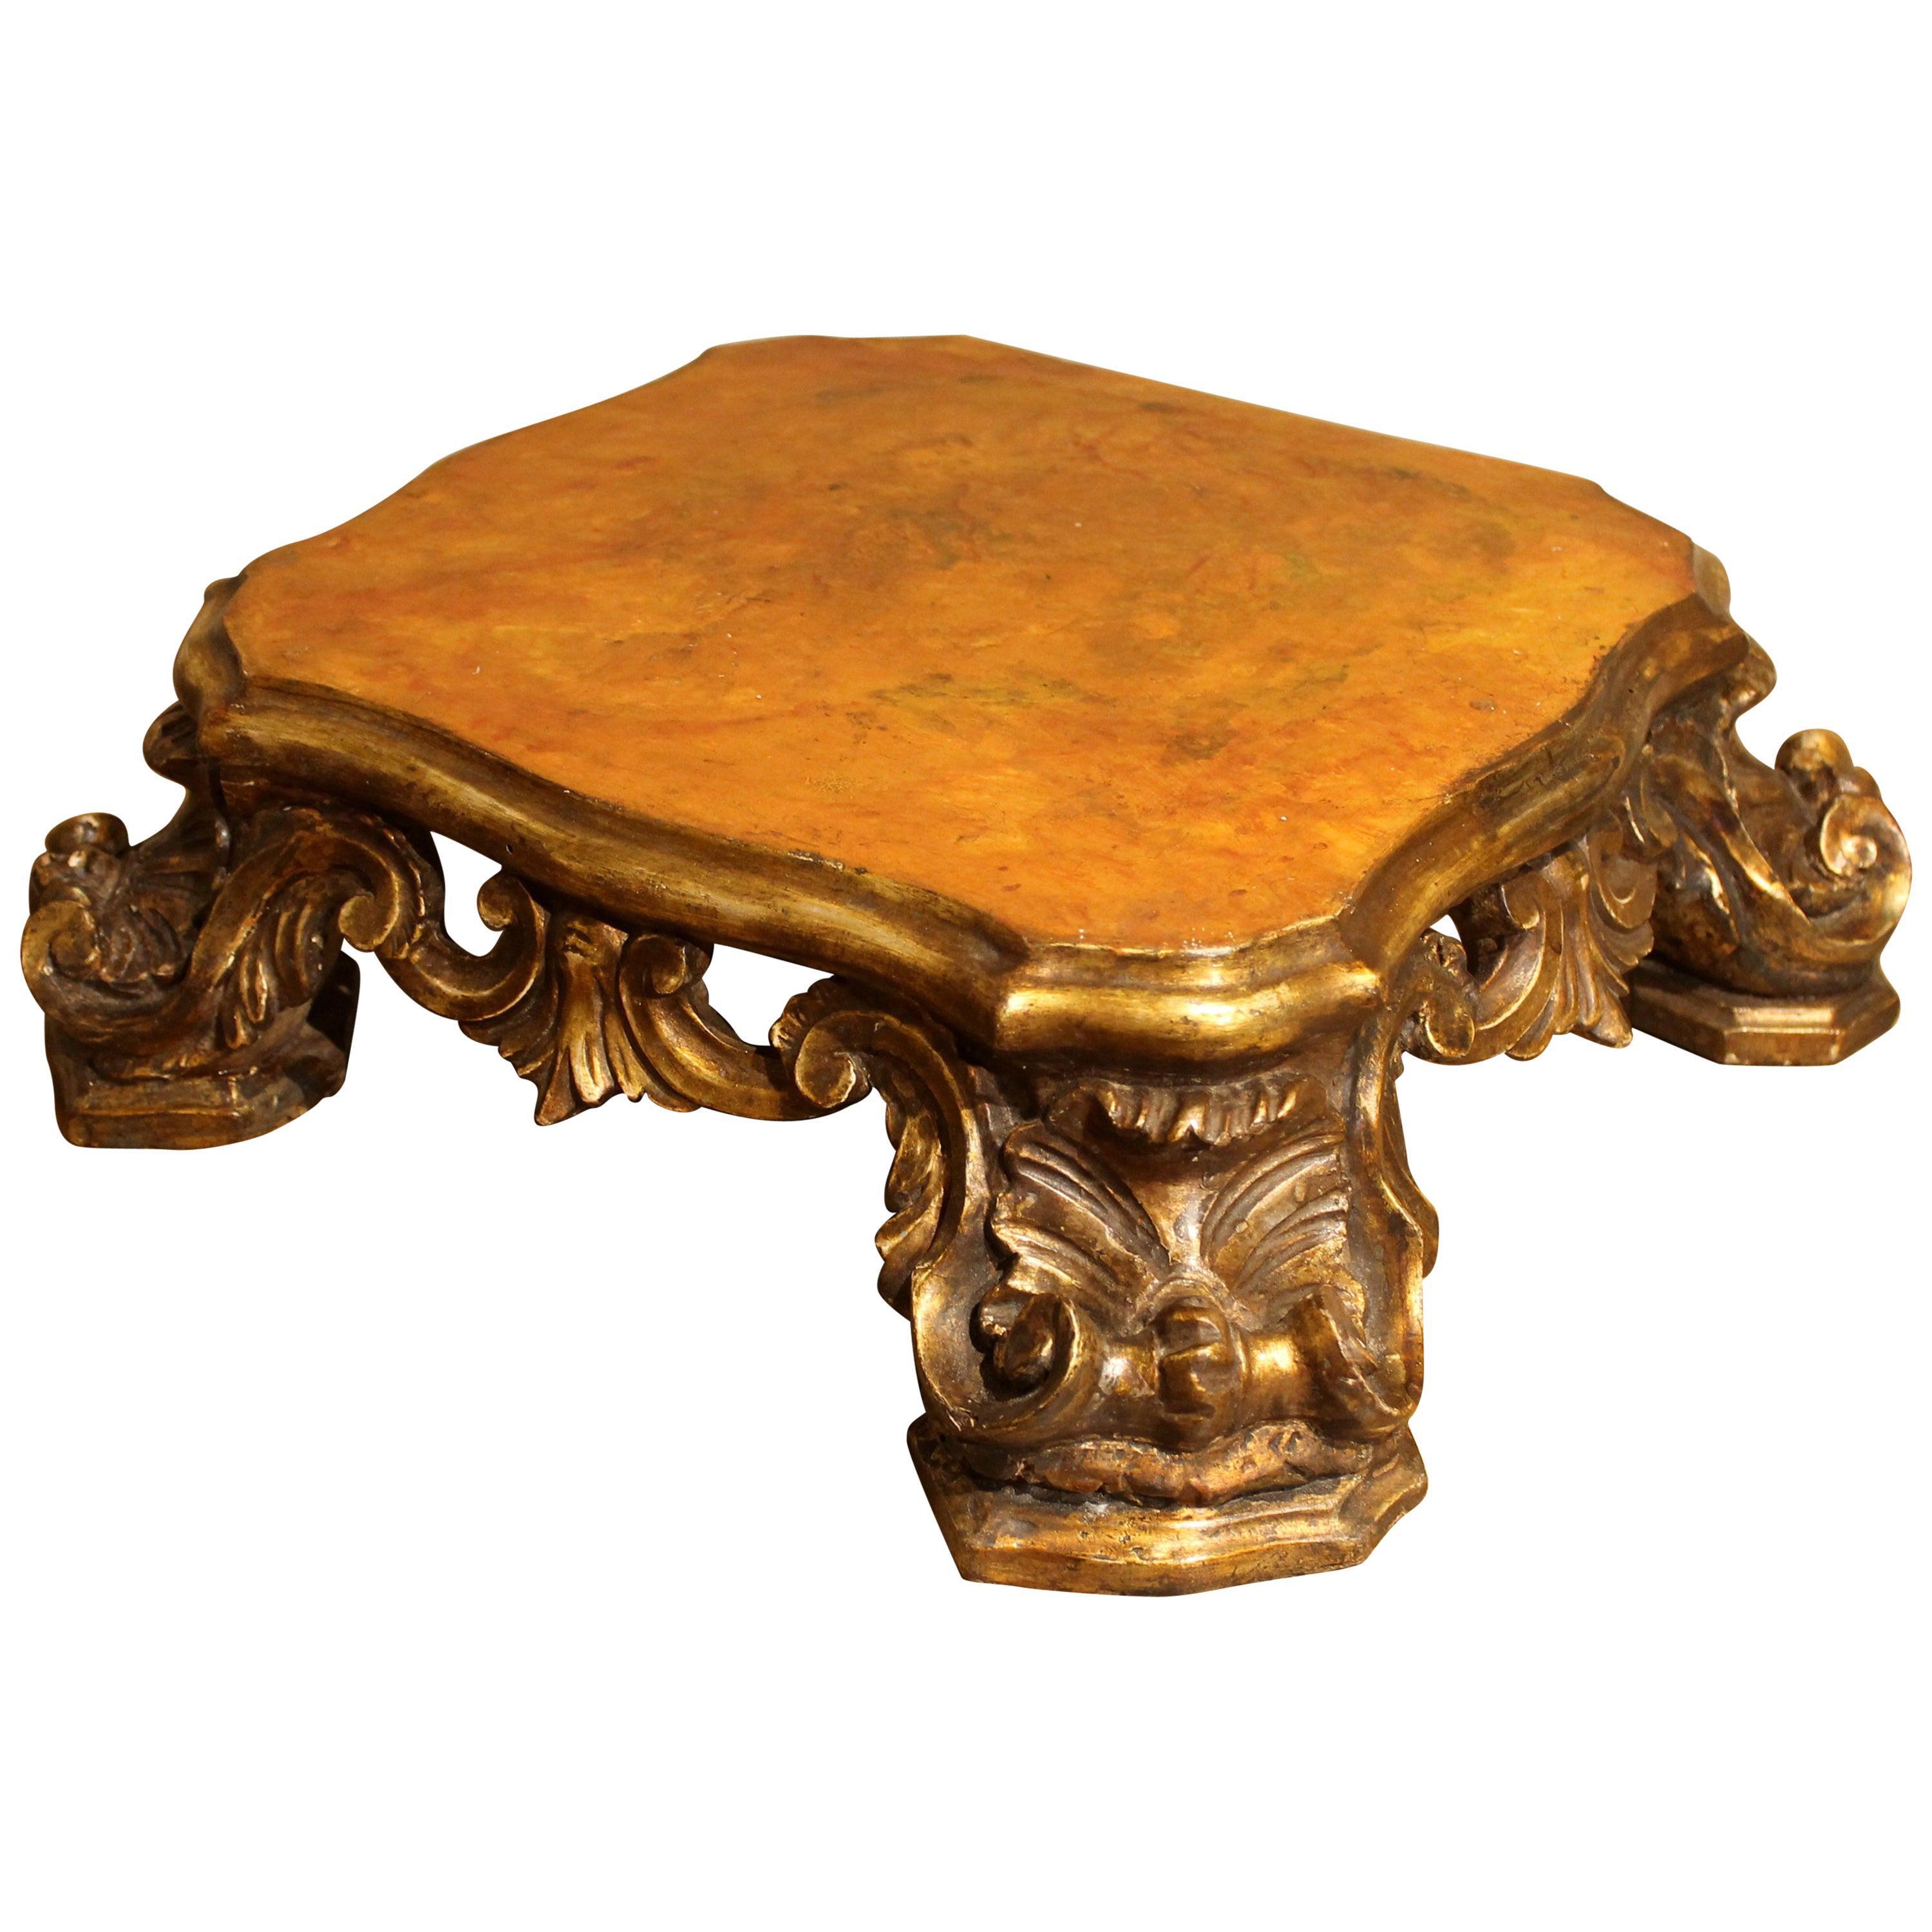 Italian Baroque Period Hand Carved, Gilded and Lacquered Wooden Base or Stand